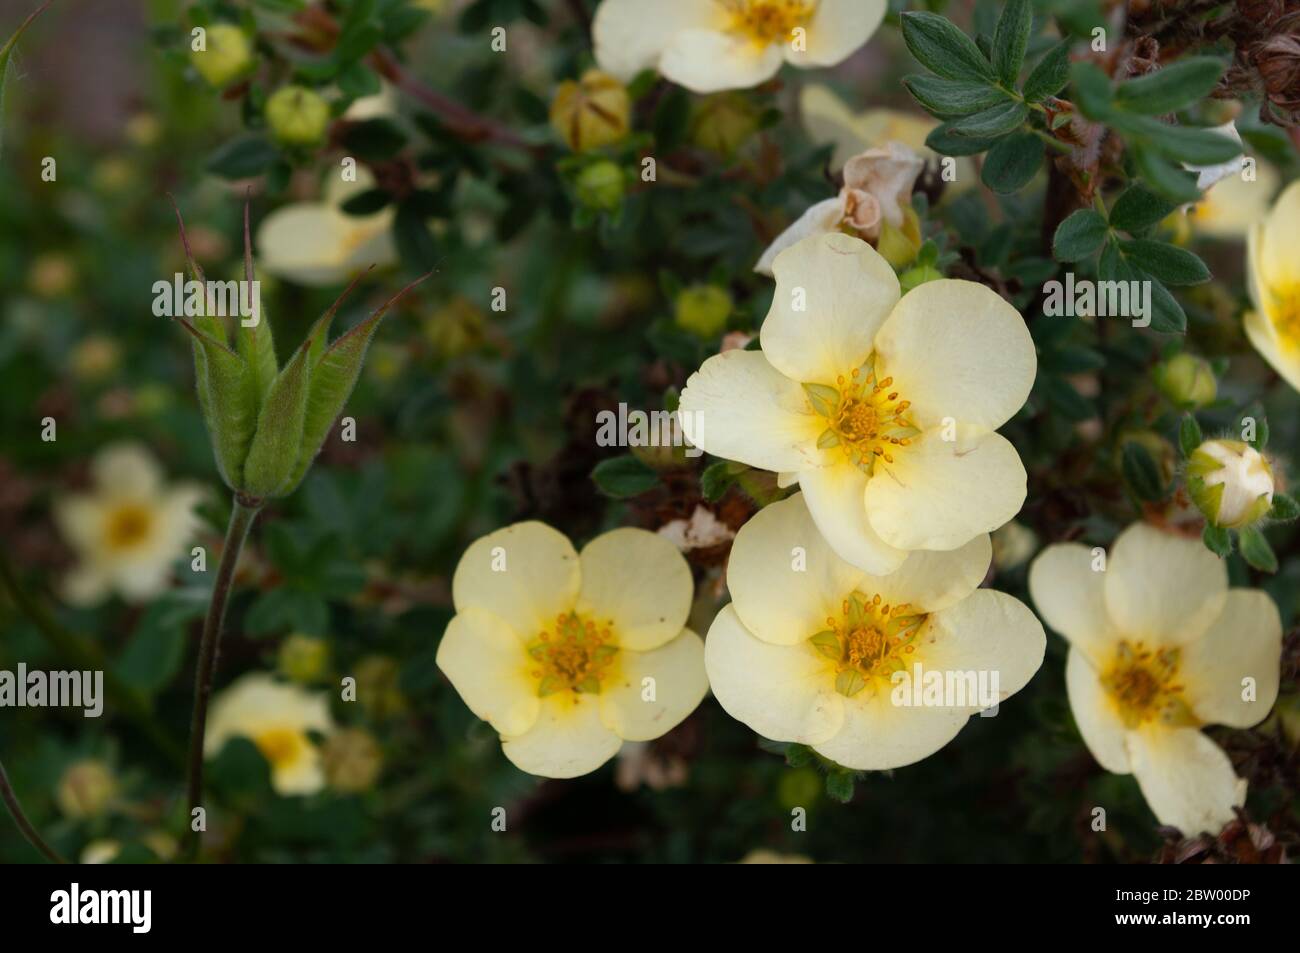 Yellow potentilla flowers and seed pods Stock Photo